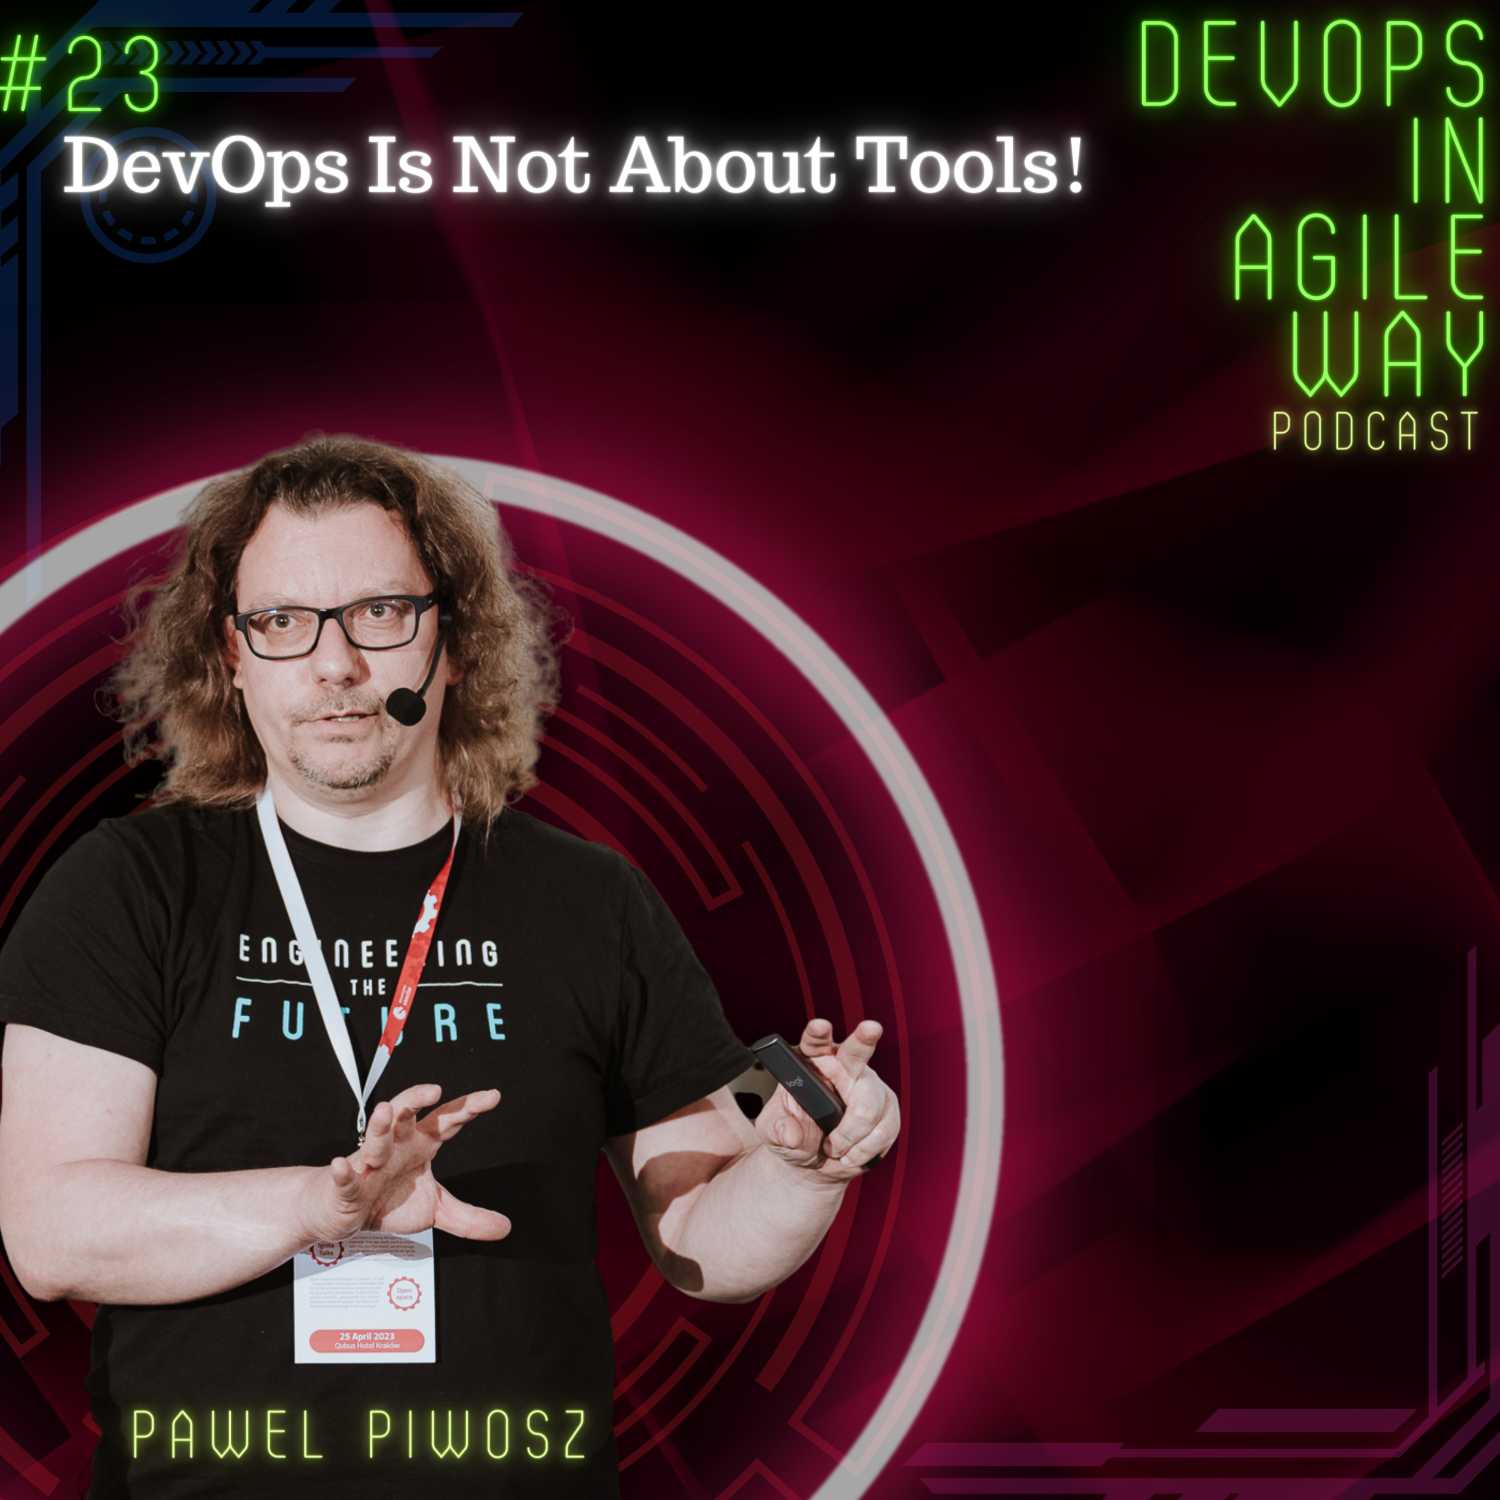 DevOps Is Not About Tools!